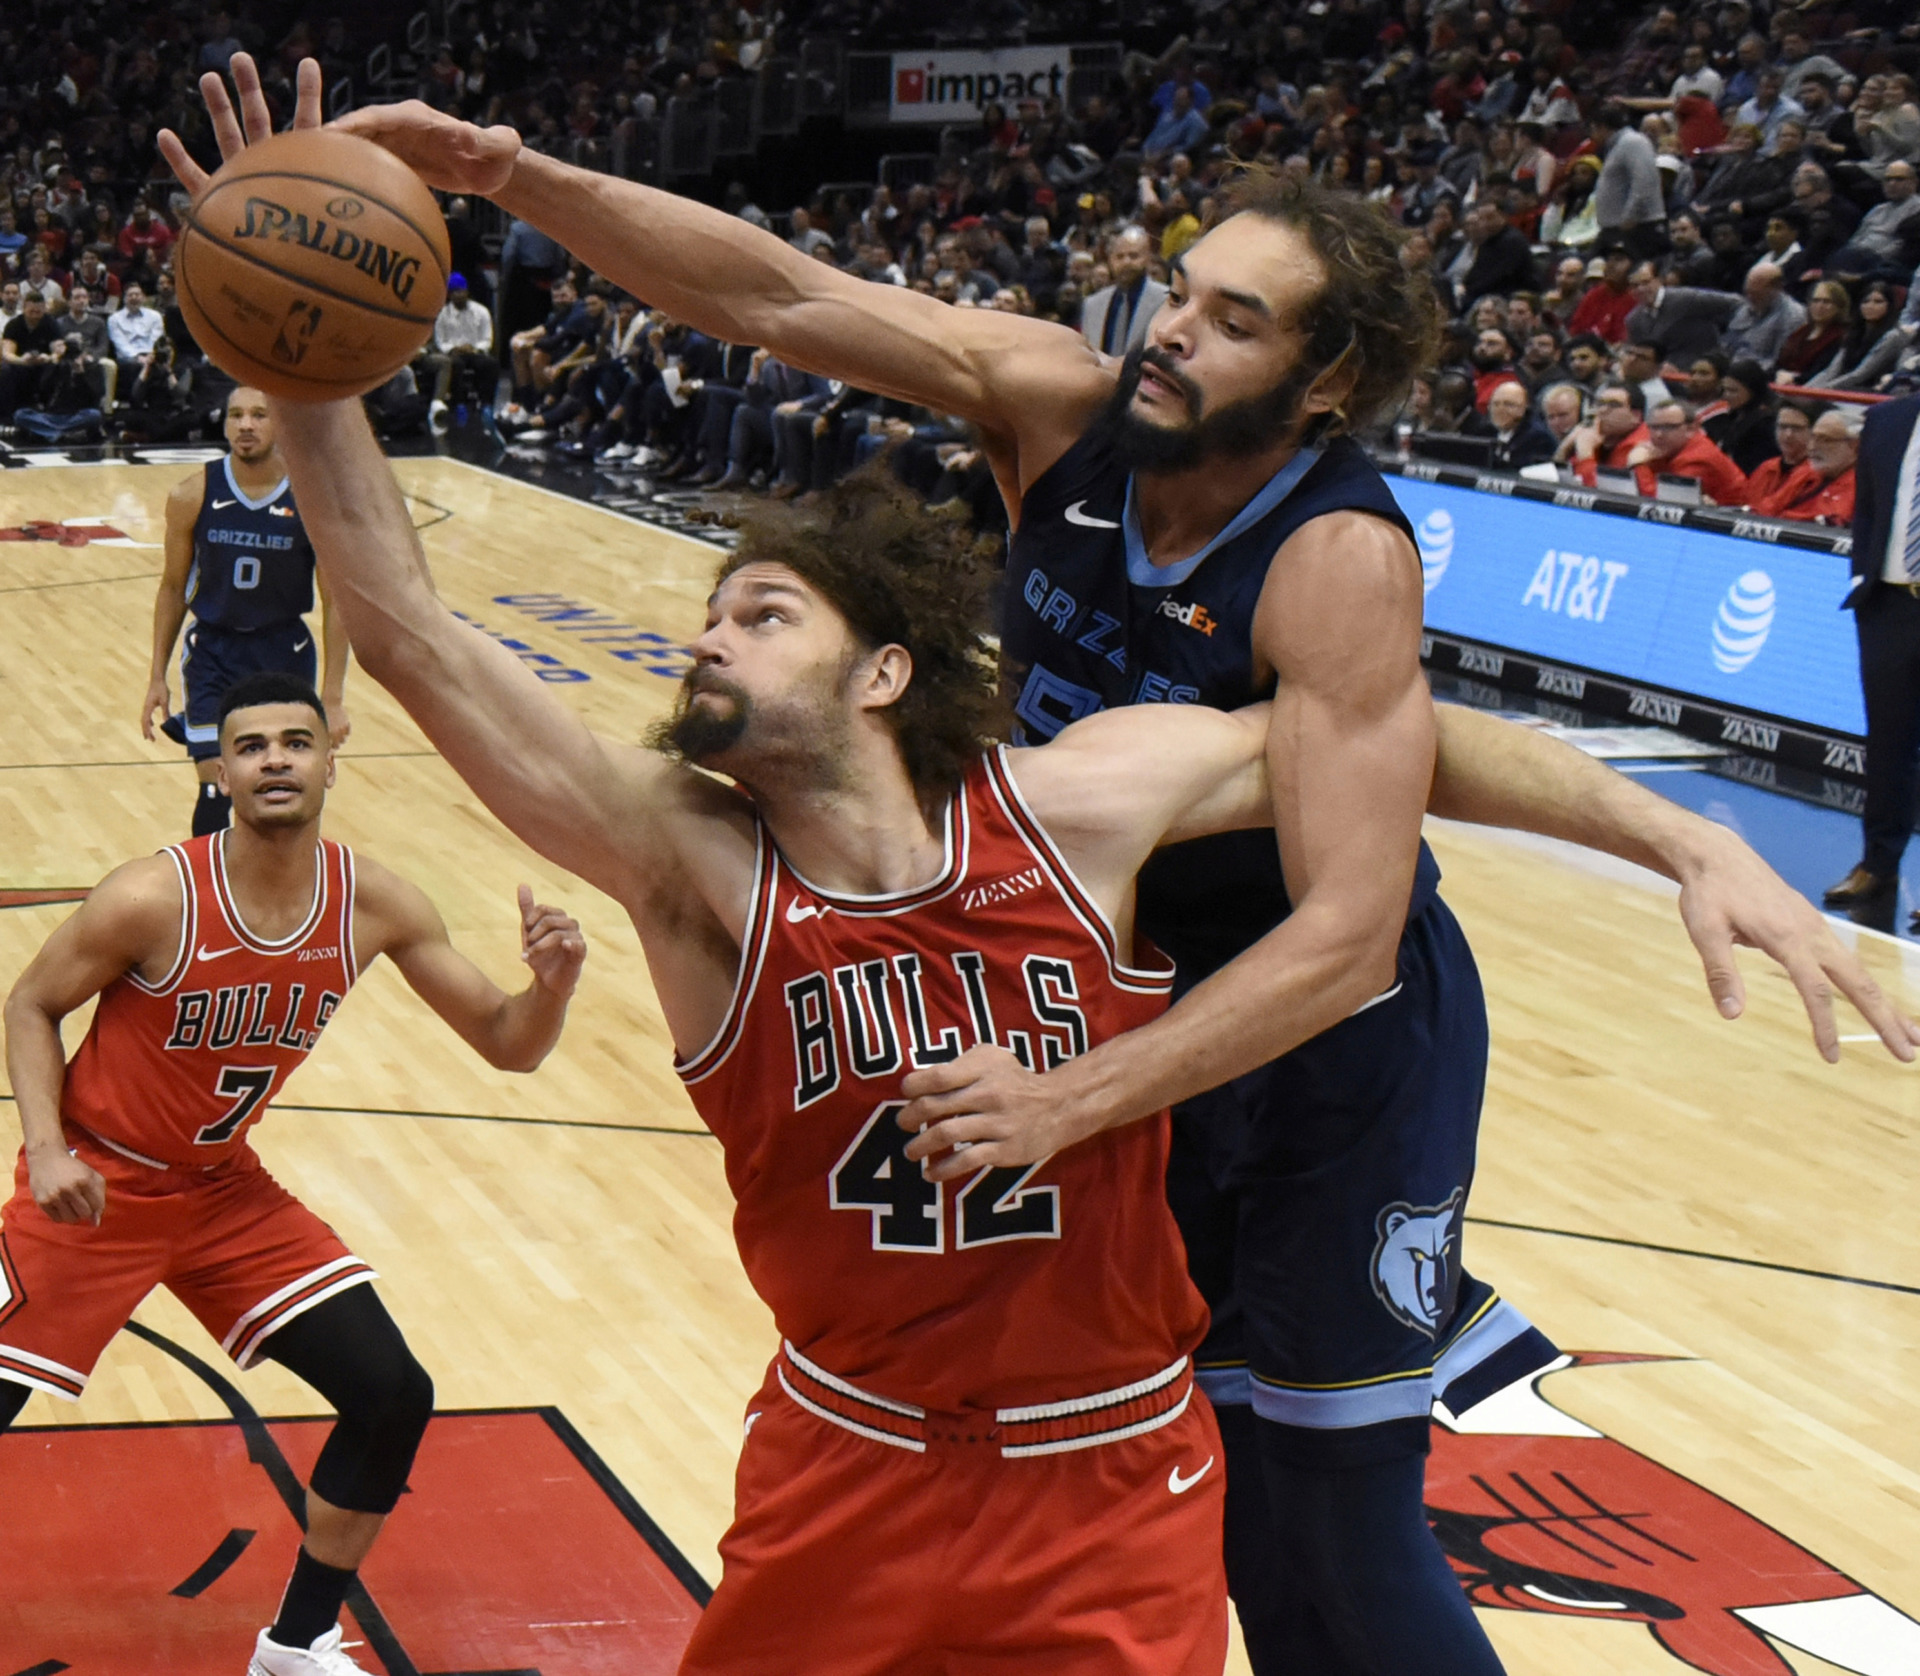 <span><strong>Chicago Bulls center Robin Lopez (42) and Memphis Grizzlies center Joakim Noah (55) go for the ball during the second half of an NBA basketball game, Wednesday, Feb. 13, 2019, in Chicago. The Bulls won 122-110.</strong> (AP Photo/David Banks)</span>